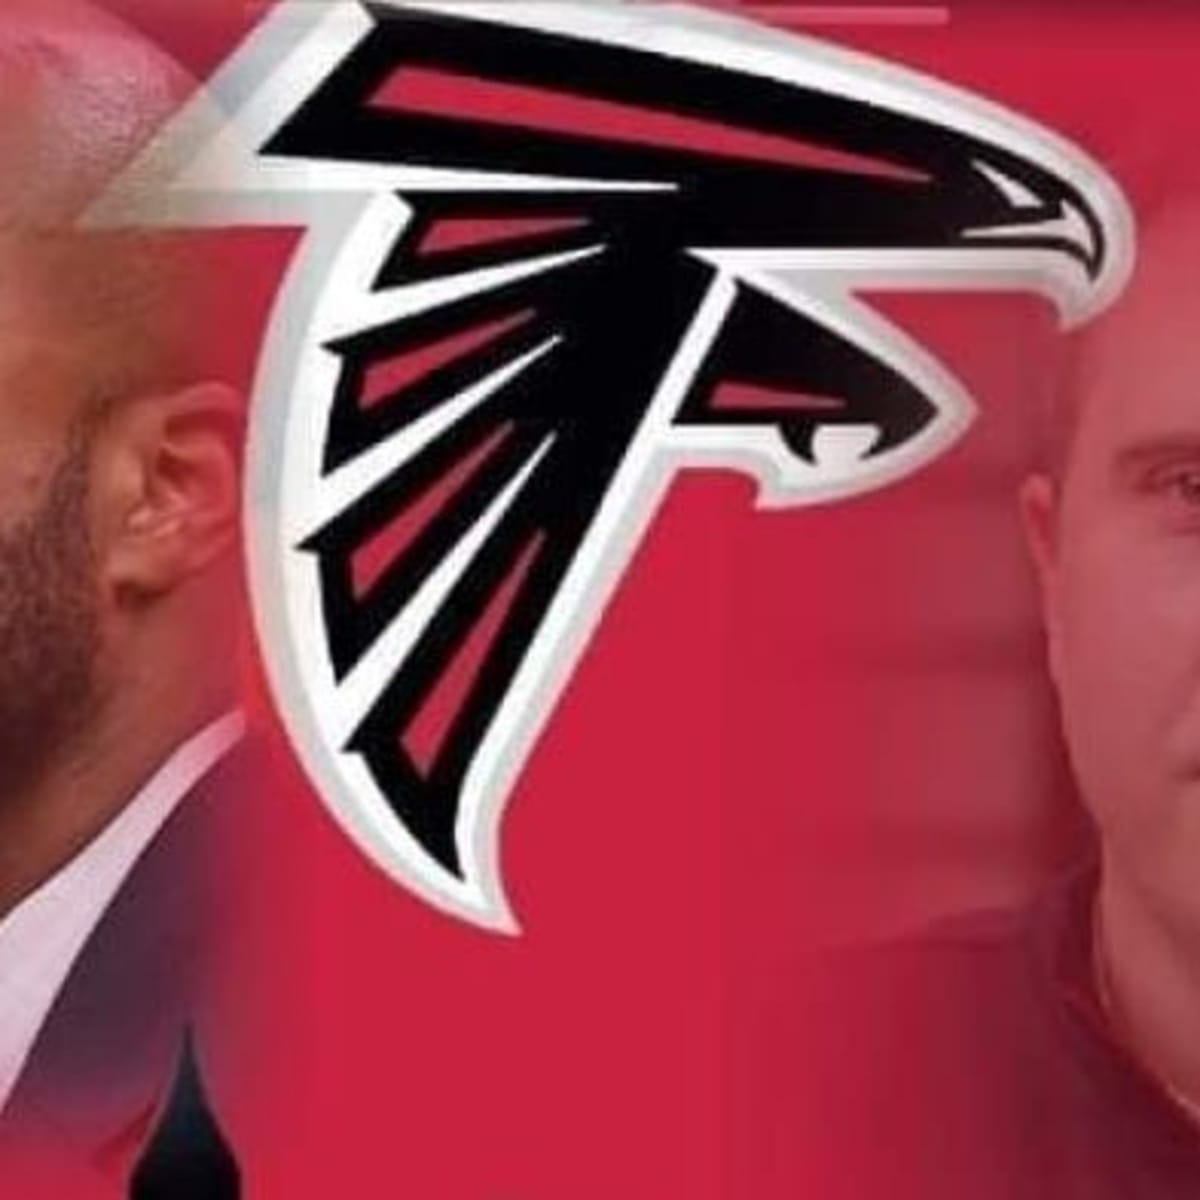 Atlanta Falcons Trade Piece Deion Jones Out For Offseason; Value  Diminished? - Sports Illustrated Atlanta Falcons News, Analysis and More